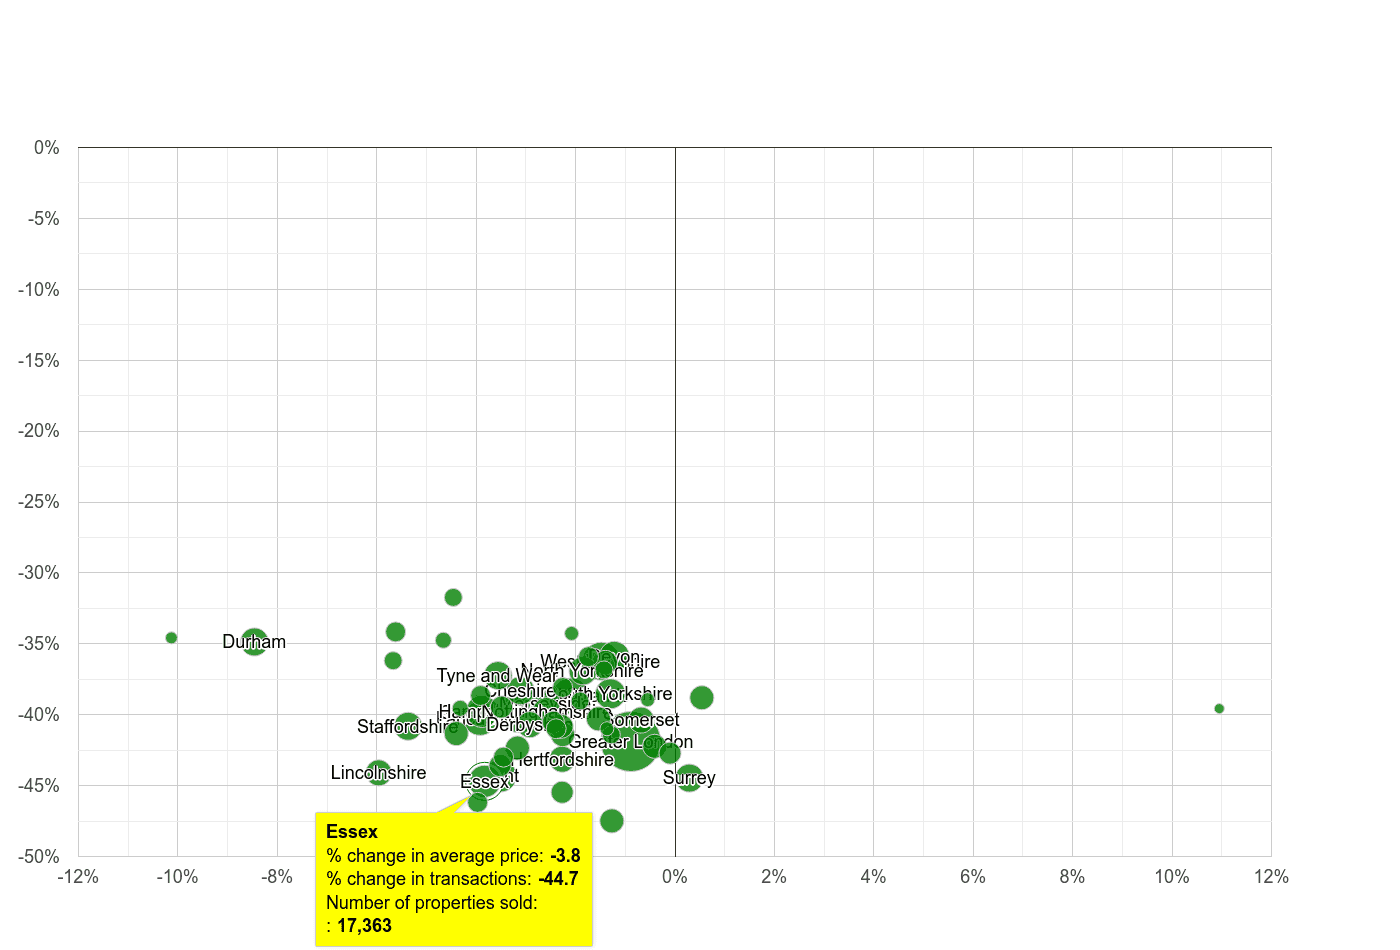 Essex property price and sales volume change relative to other counties